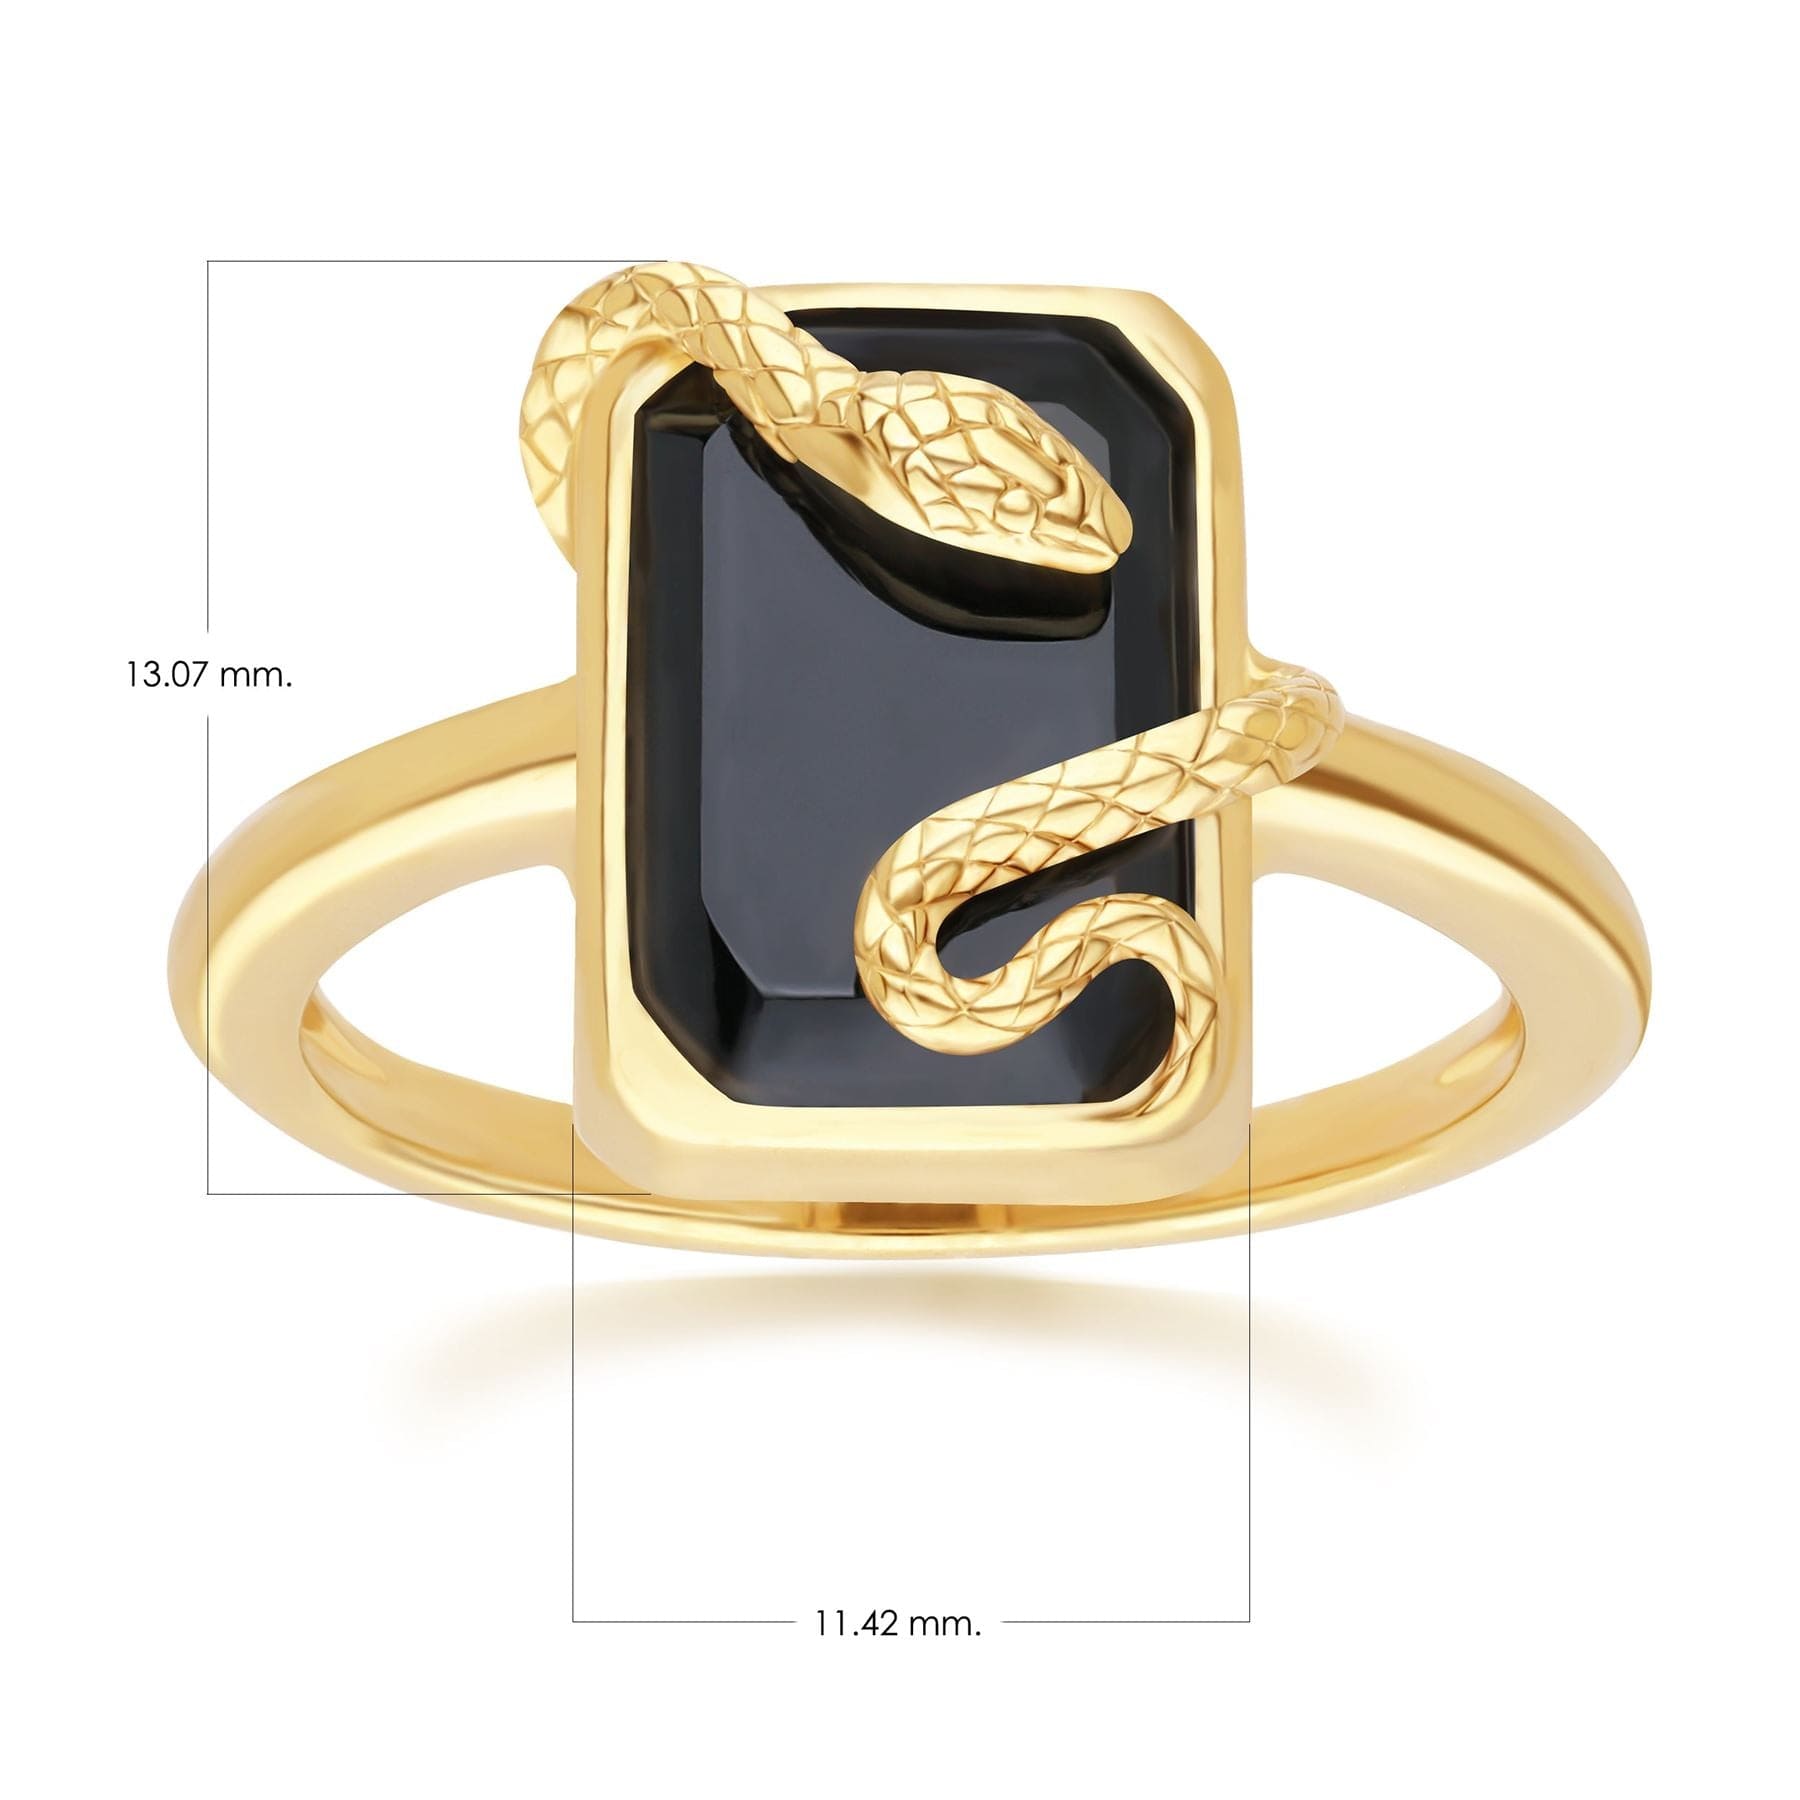 Grand Deco Black Onyx Snake Wrap Ring in Gold Plated Sterling Silver - Gemondo